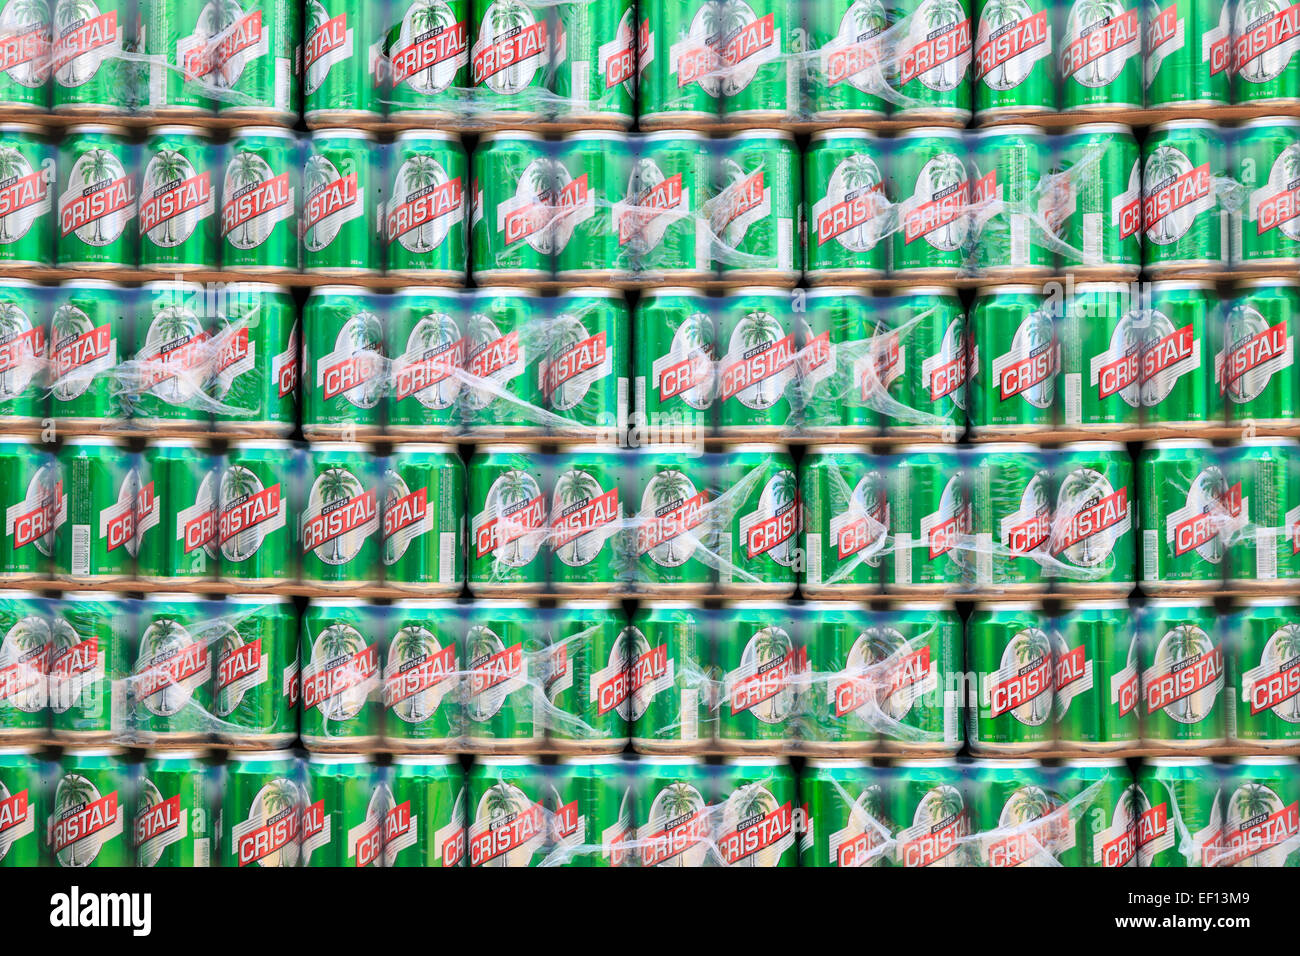 [Editorial Use Only] A wall of Cerveza Cristal beer cans, a popular beer in Cuba Stock Photo